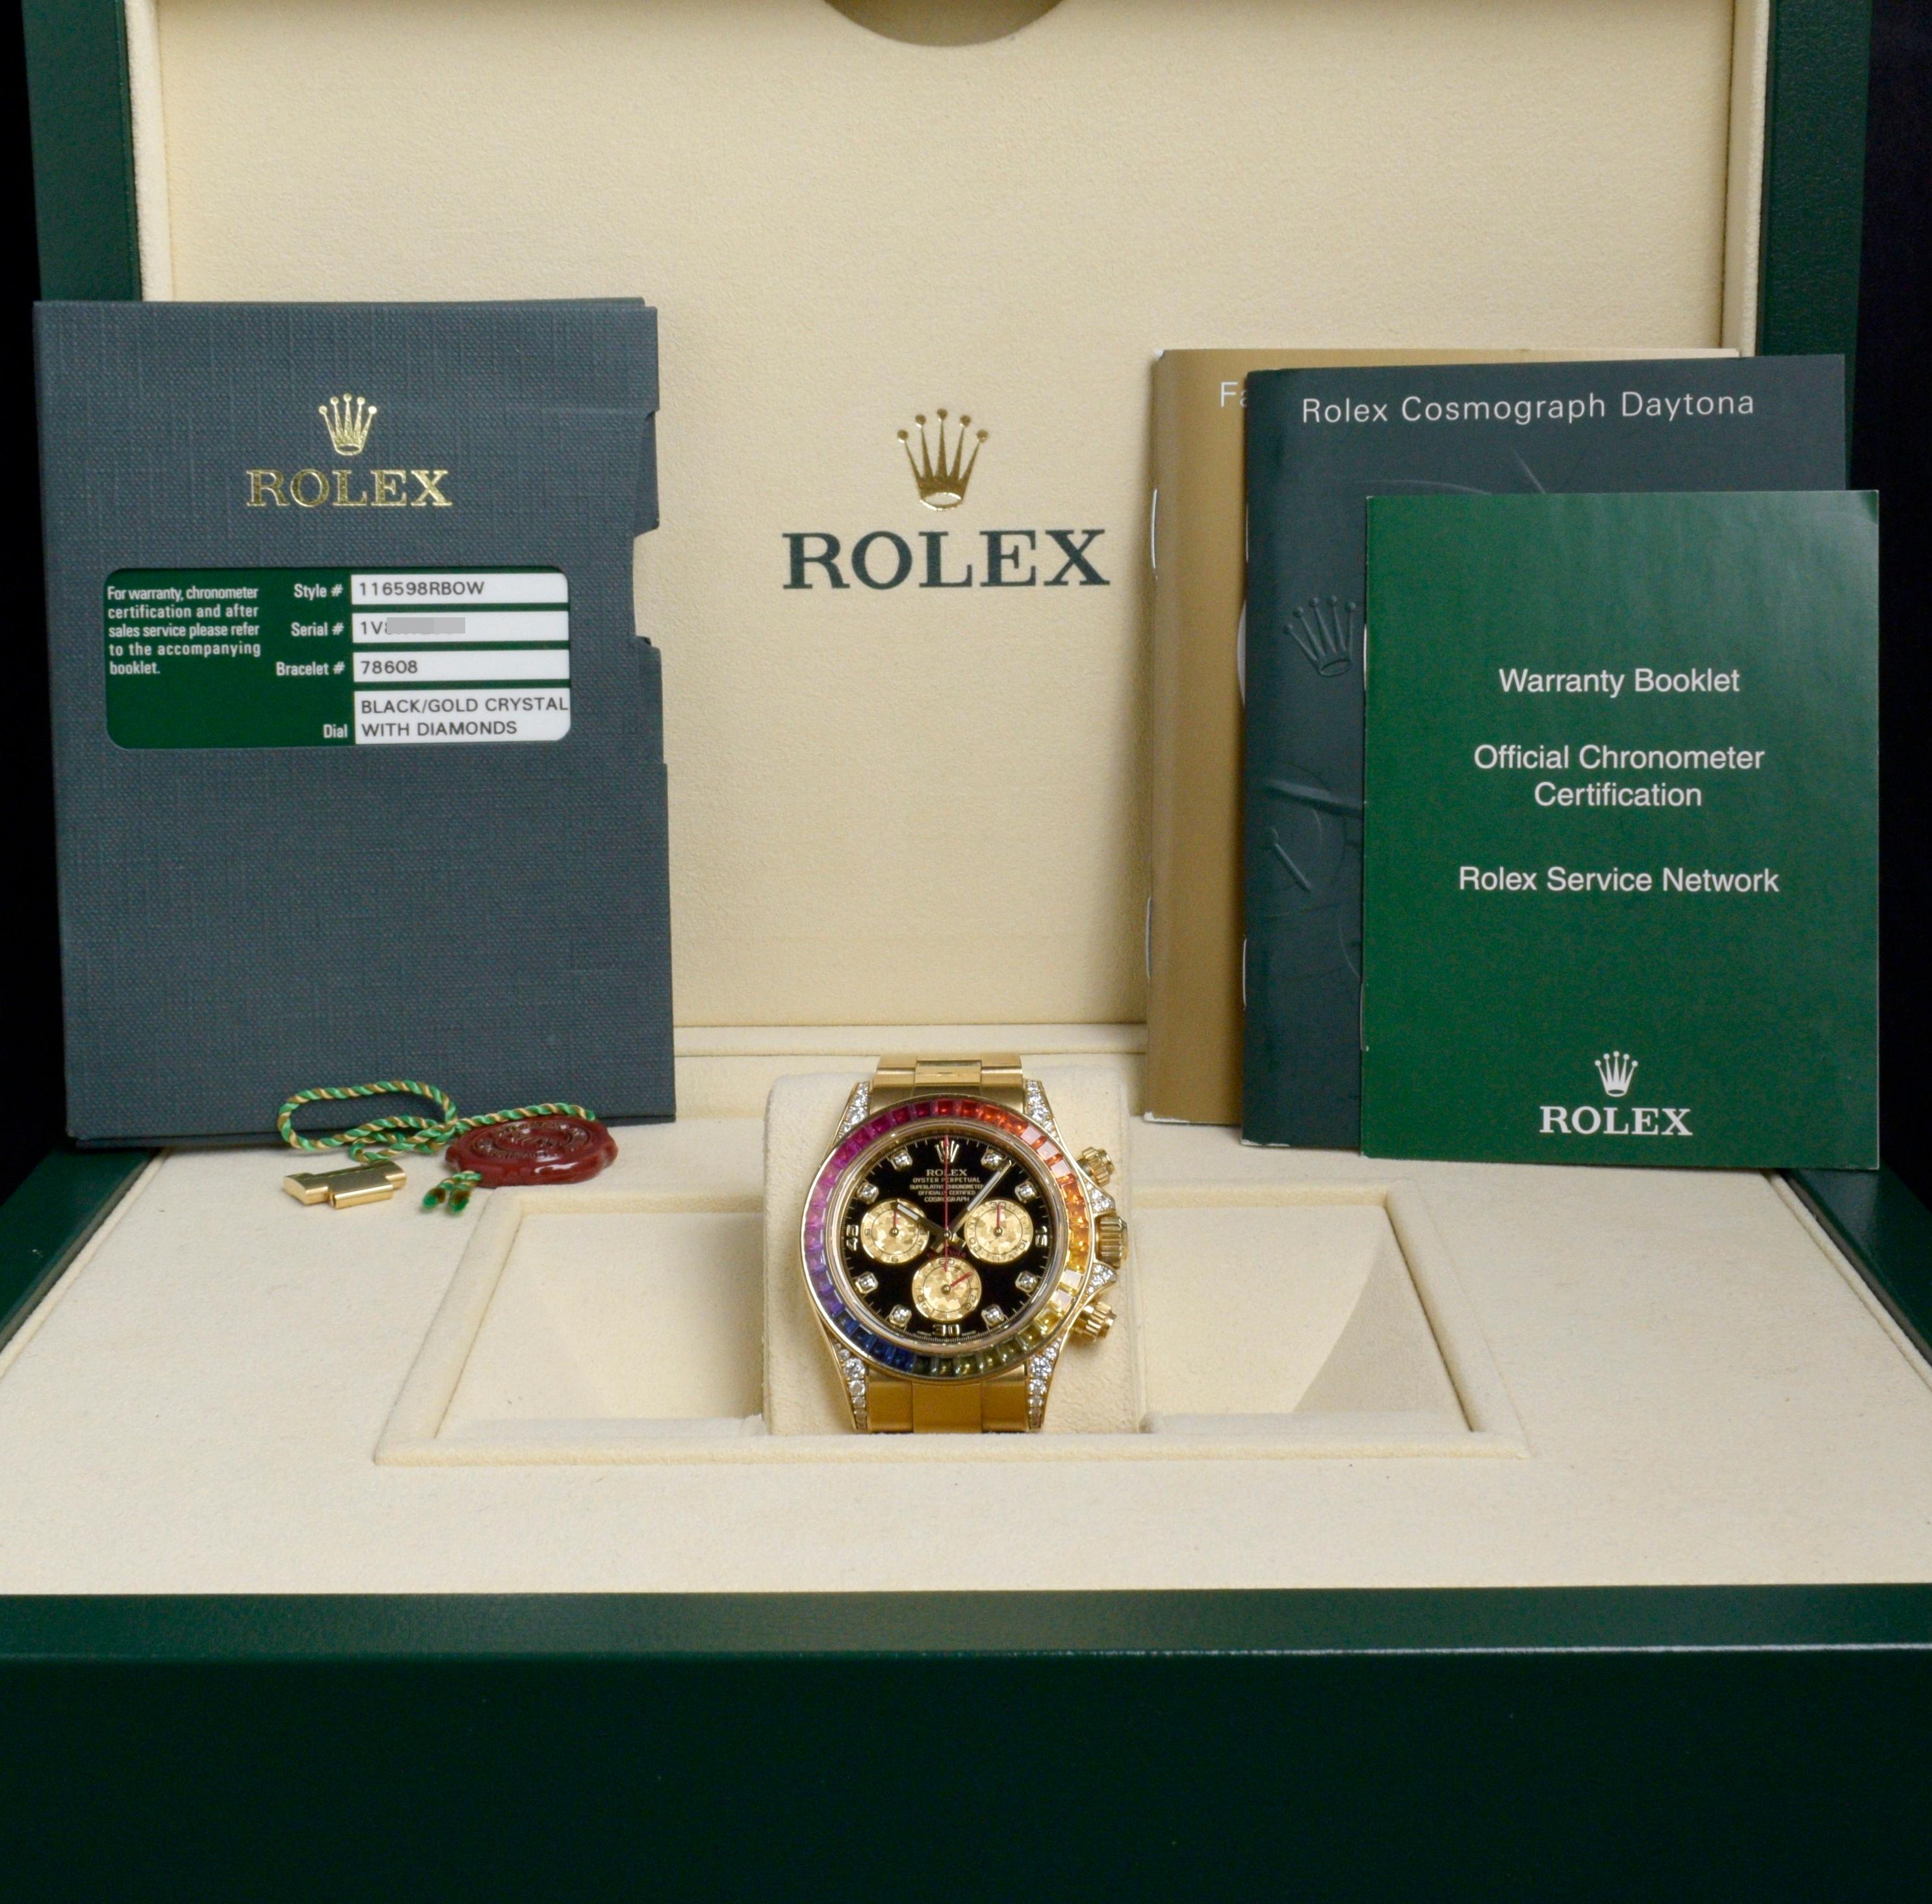 Brand: Rolex
Model: 116598RBOW
Year: 2013
Serial number: 1Vxxxxxx
Reference: C03745

Rolex is a watch manufacturer that can alternate seamlessly from classic to avant-garde designs, something that has been demonstrated numerous times over the